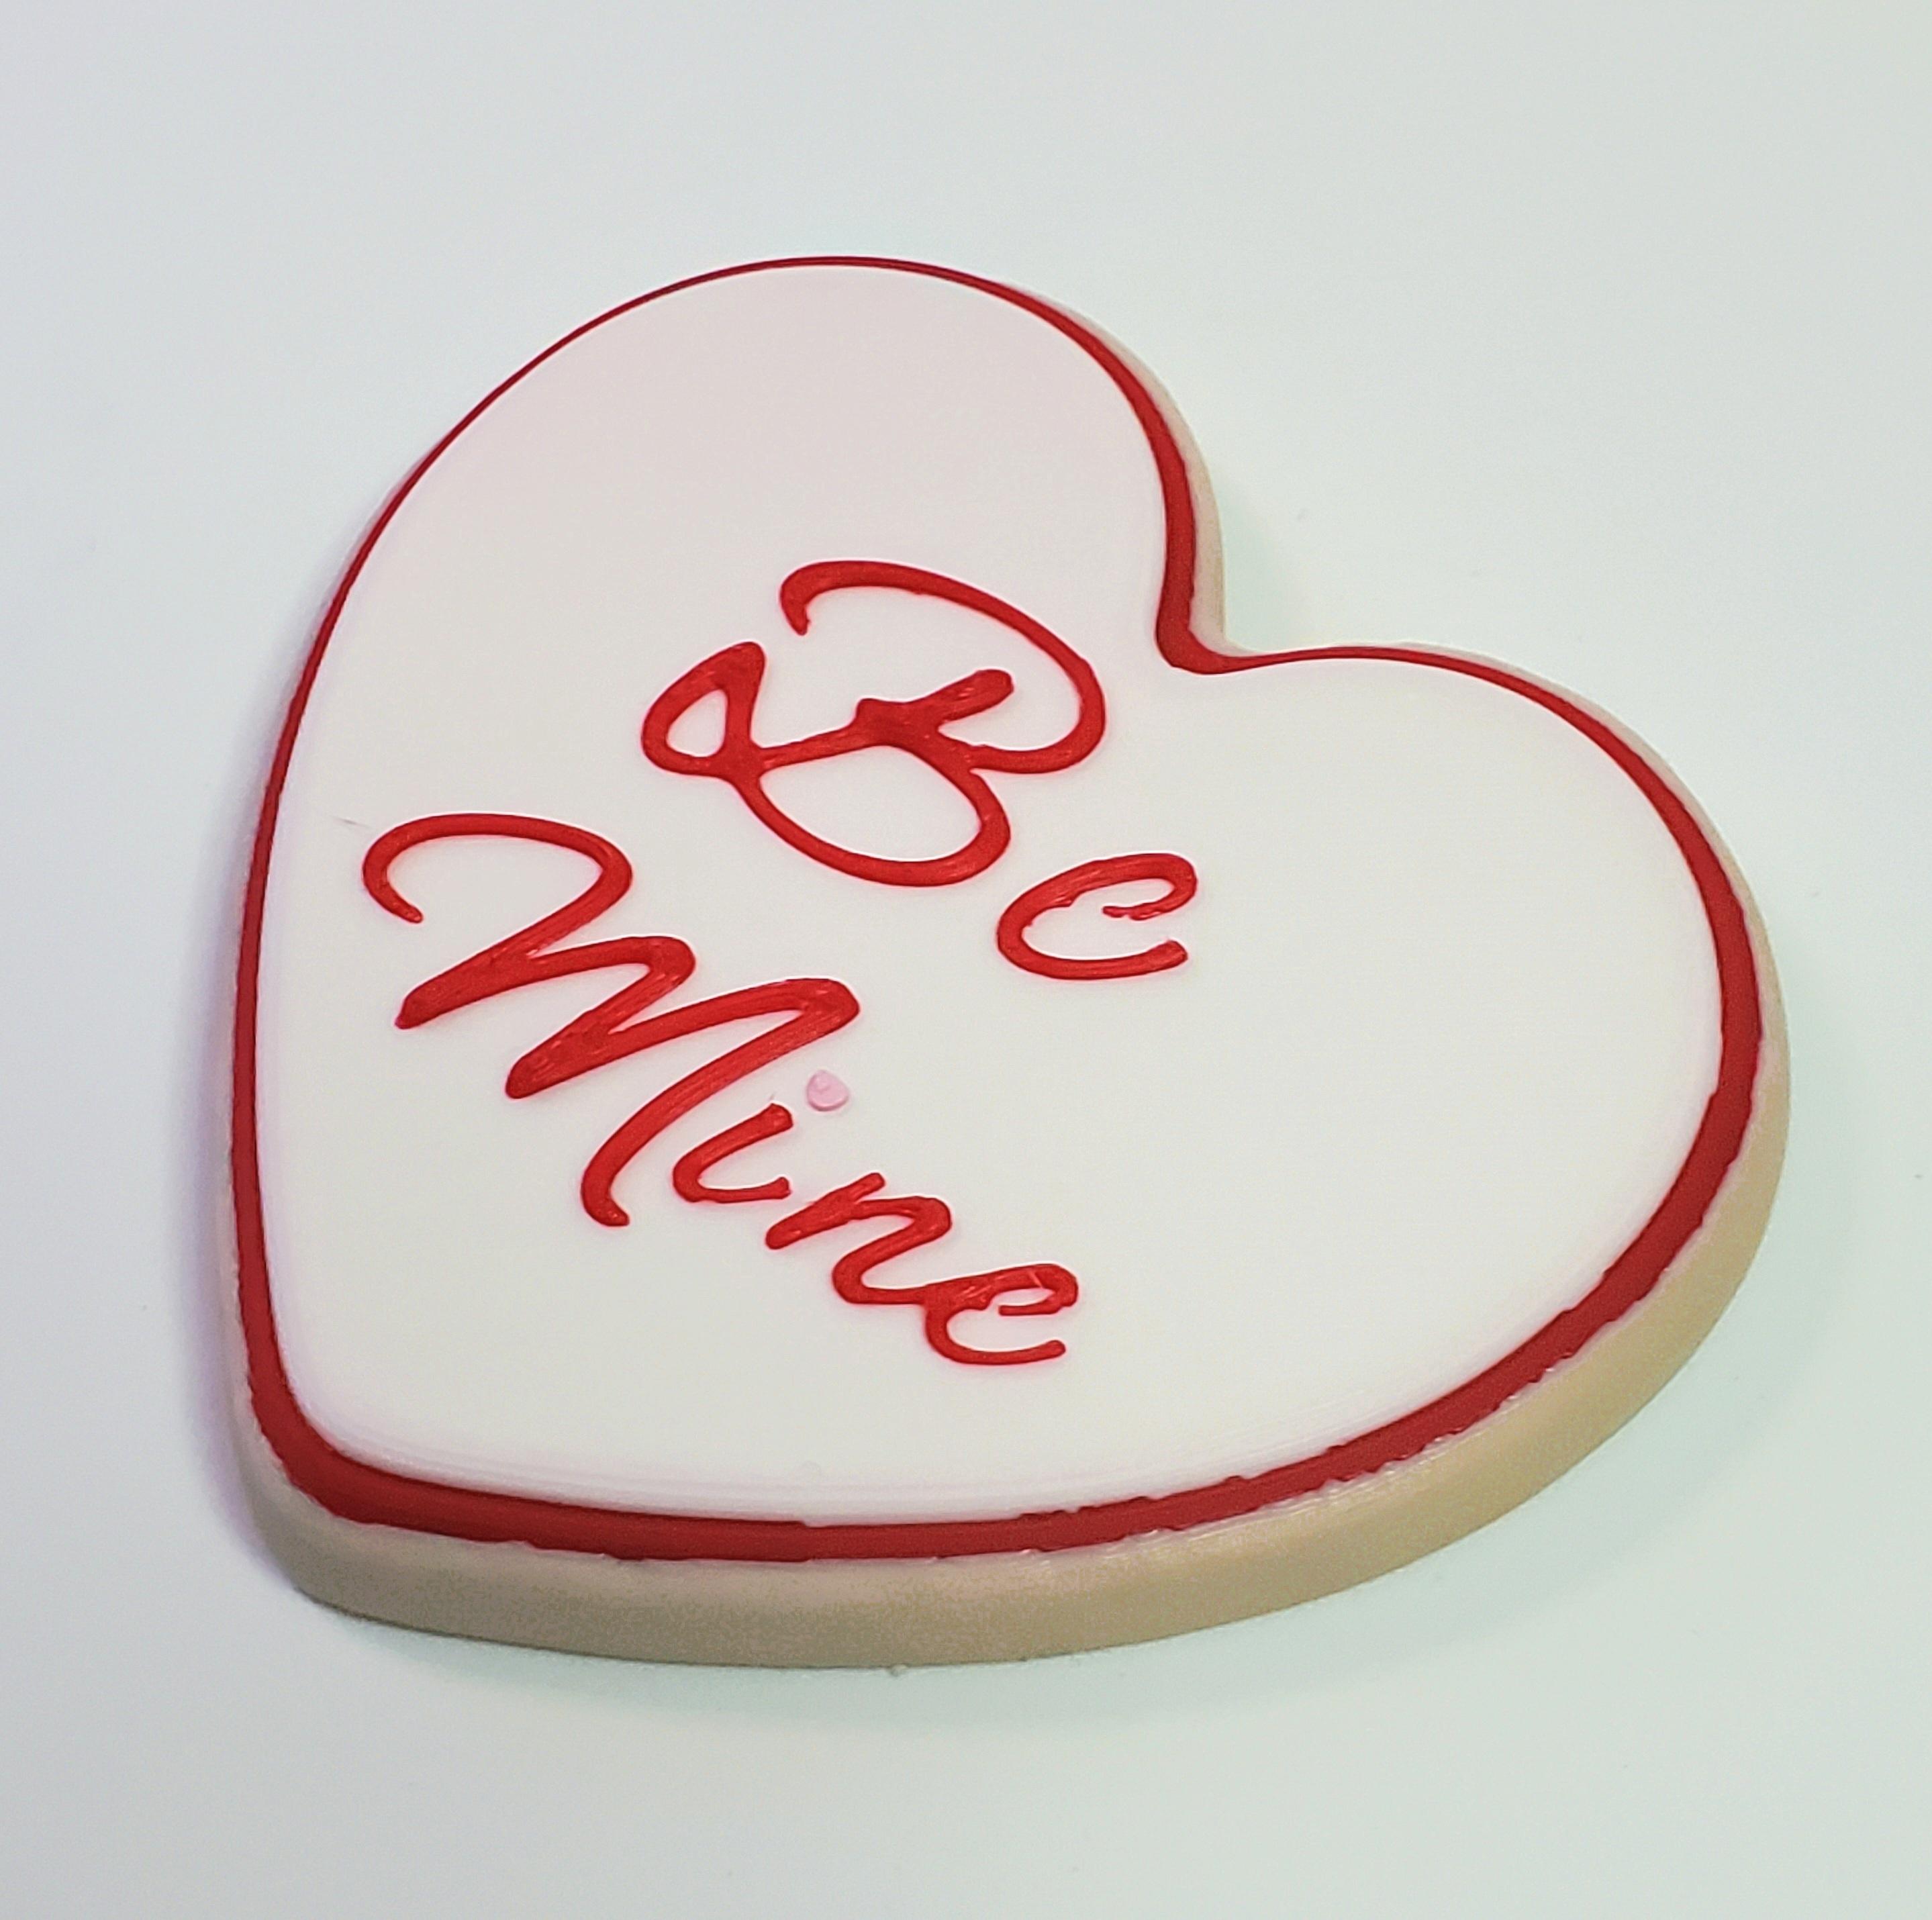 'Be Mine' Heart-Shaped Shortbread Cookie with Royal Icing for Valentine's Day :: Delicious Desserts! 3d model